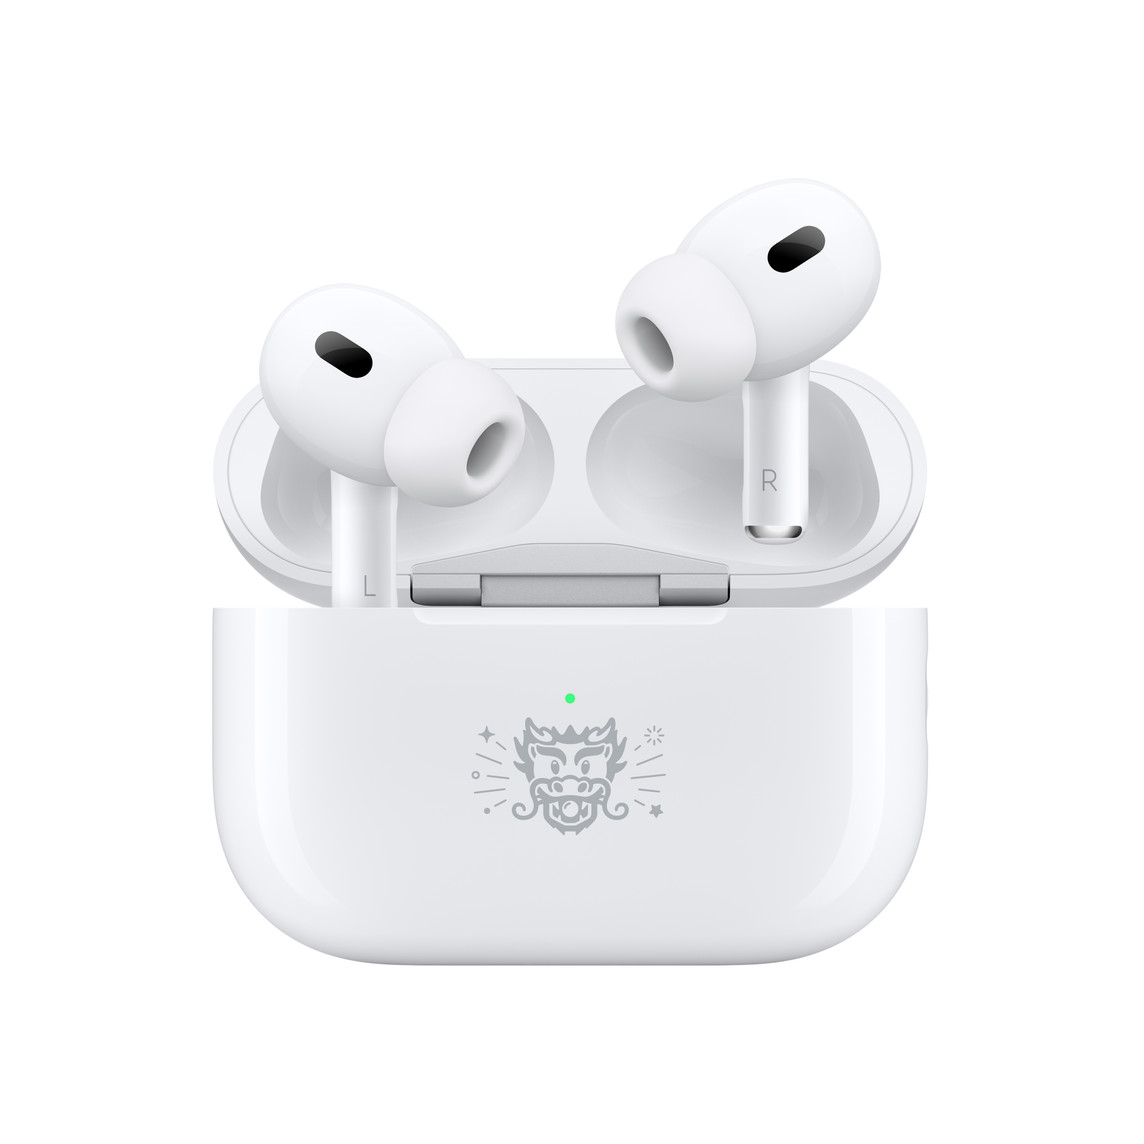 AirPods Pro 龍年特別款 AirPods Pro 2